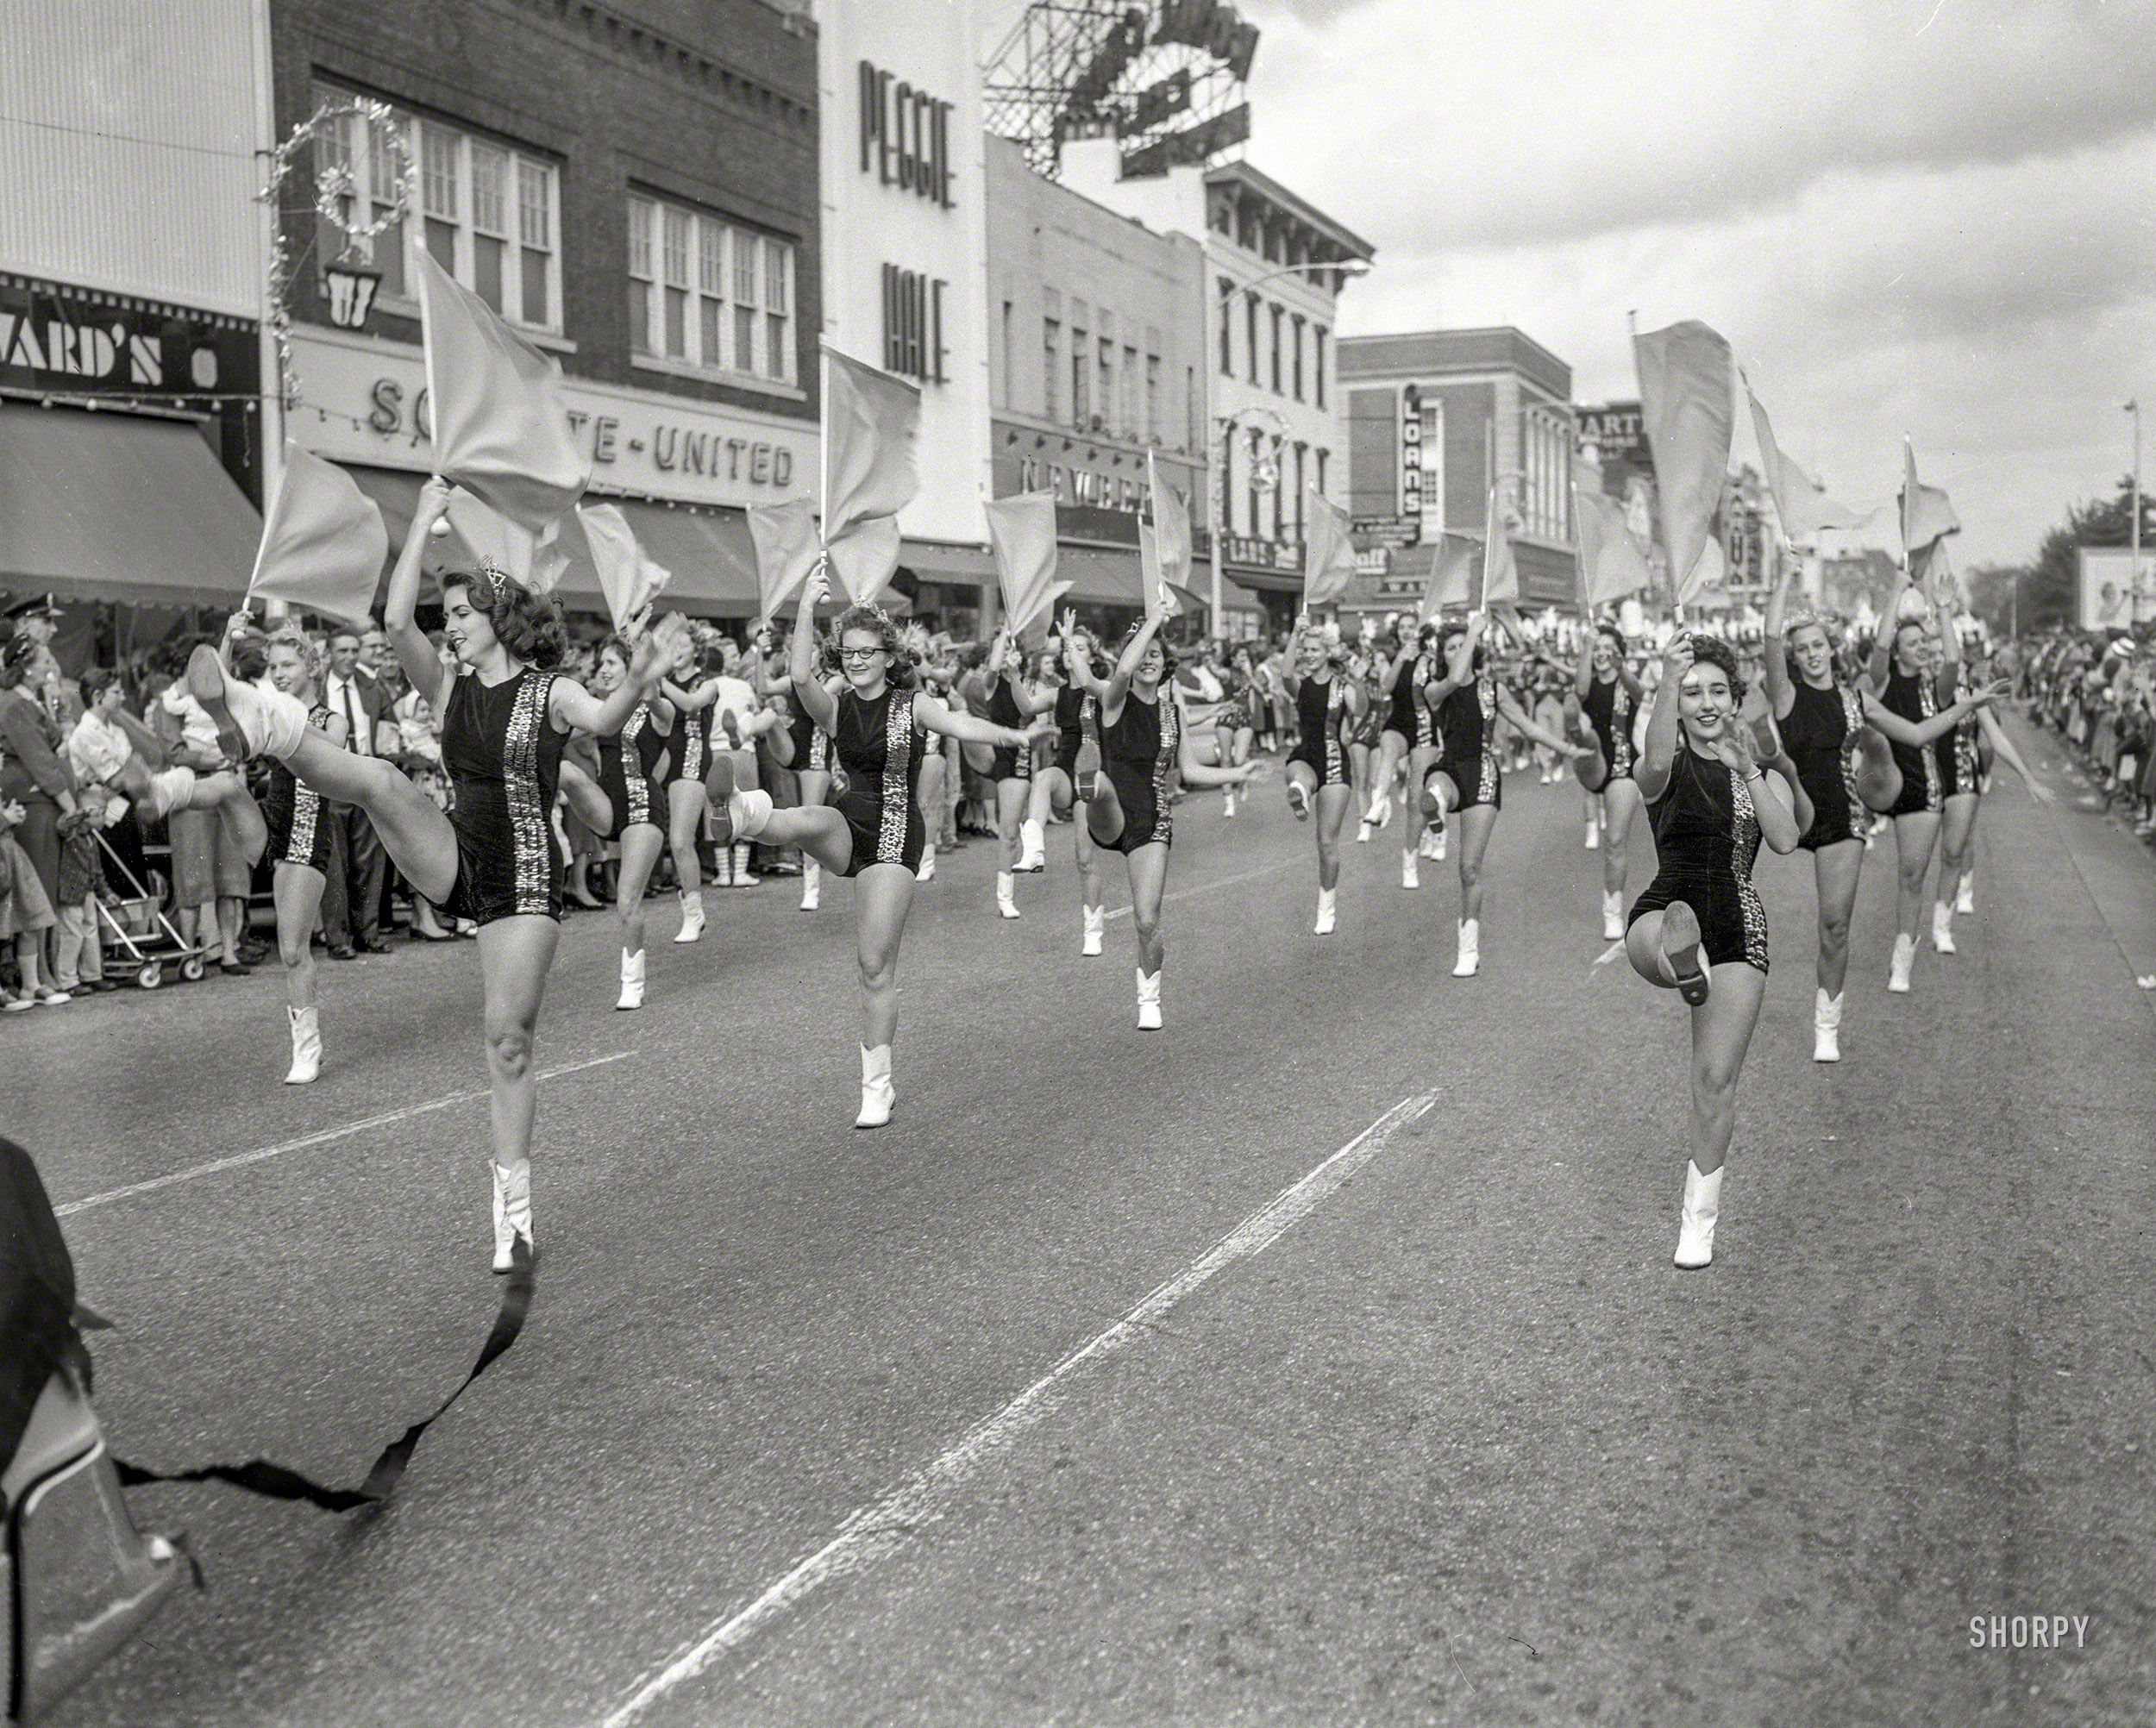 "Parade." Somewhere Down South circa 1961. Who can tell us where? 4x5 inch acetate negative from the Shorpy News Photo Archive. View full size.